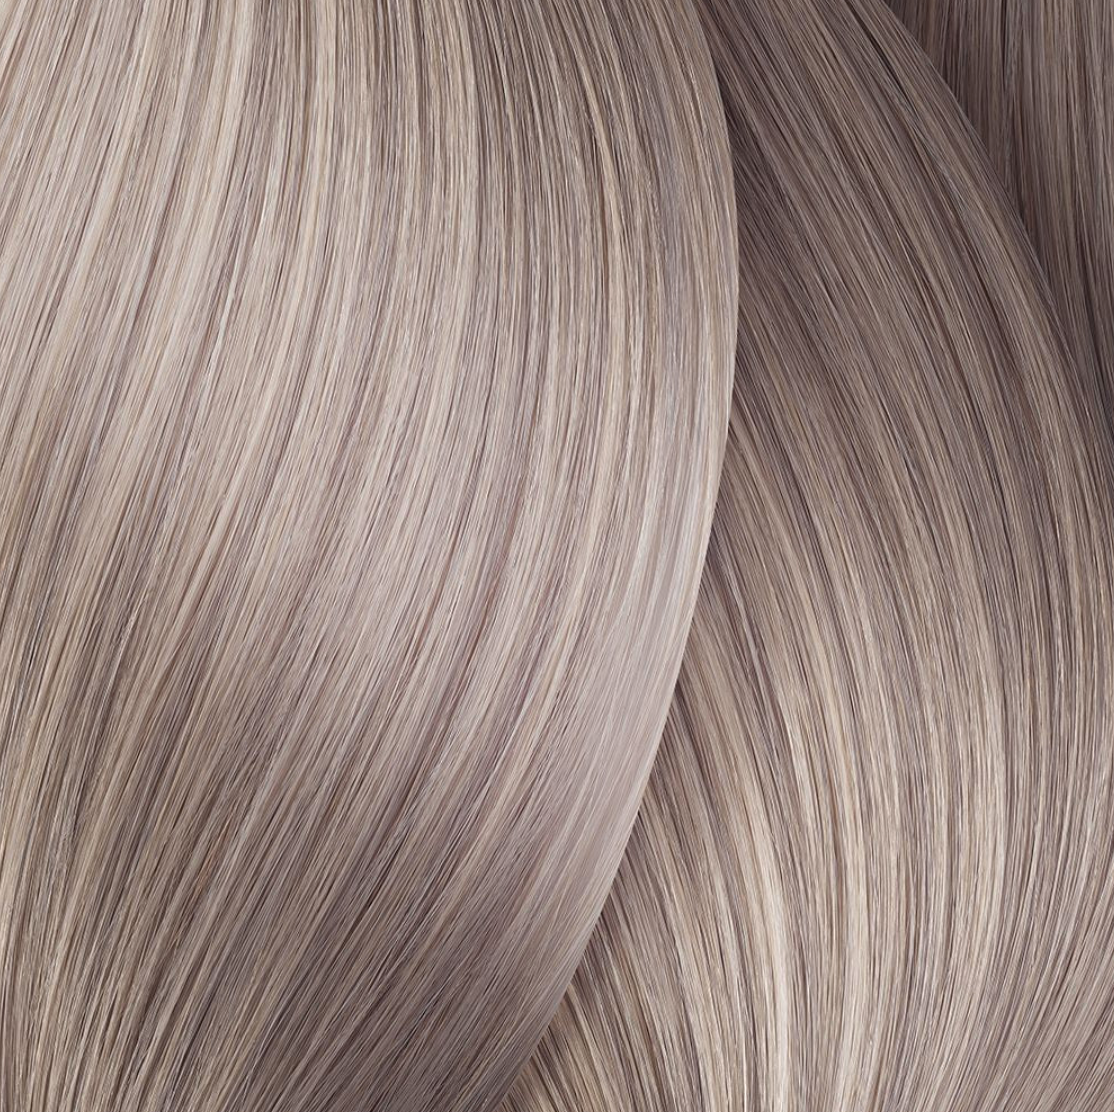 a close up of a blonde hair texture